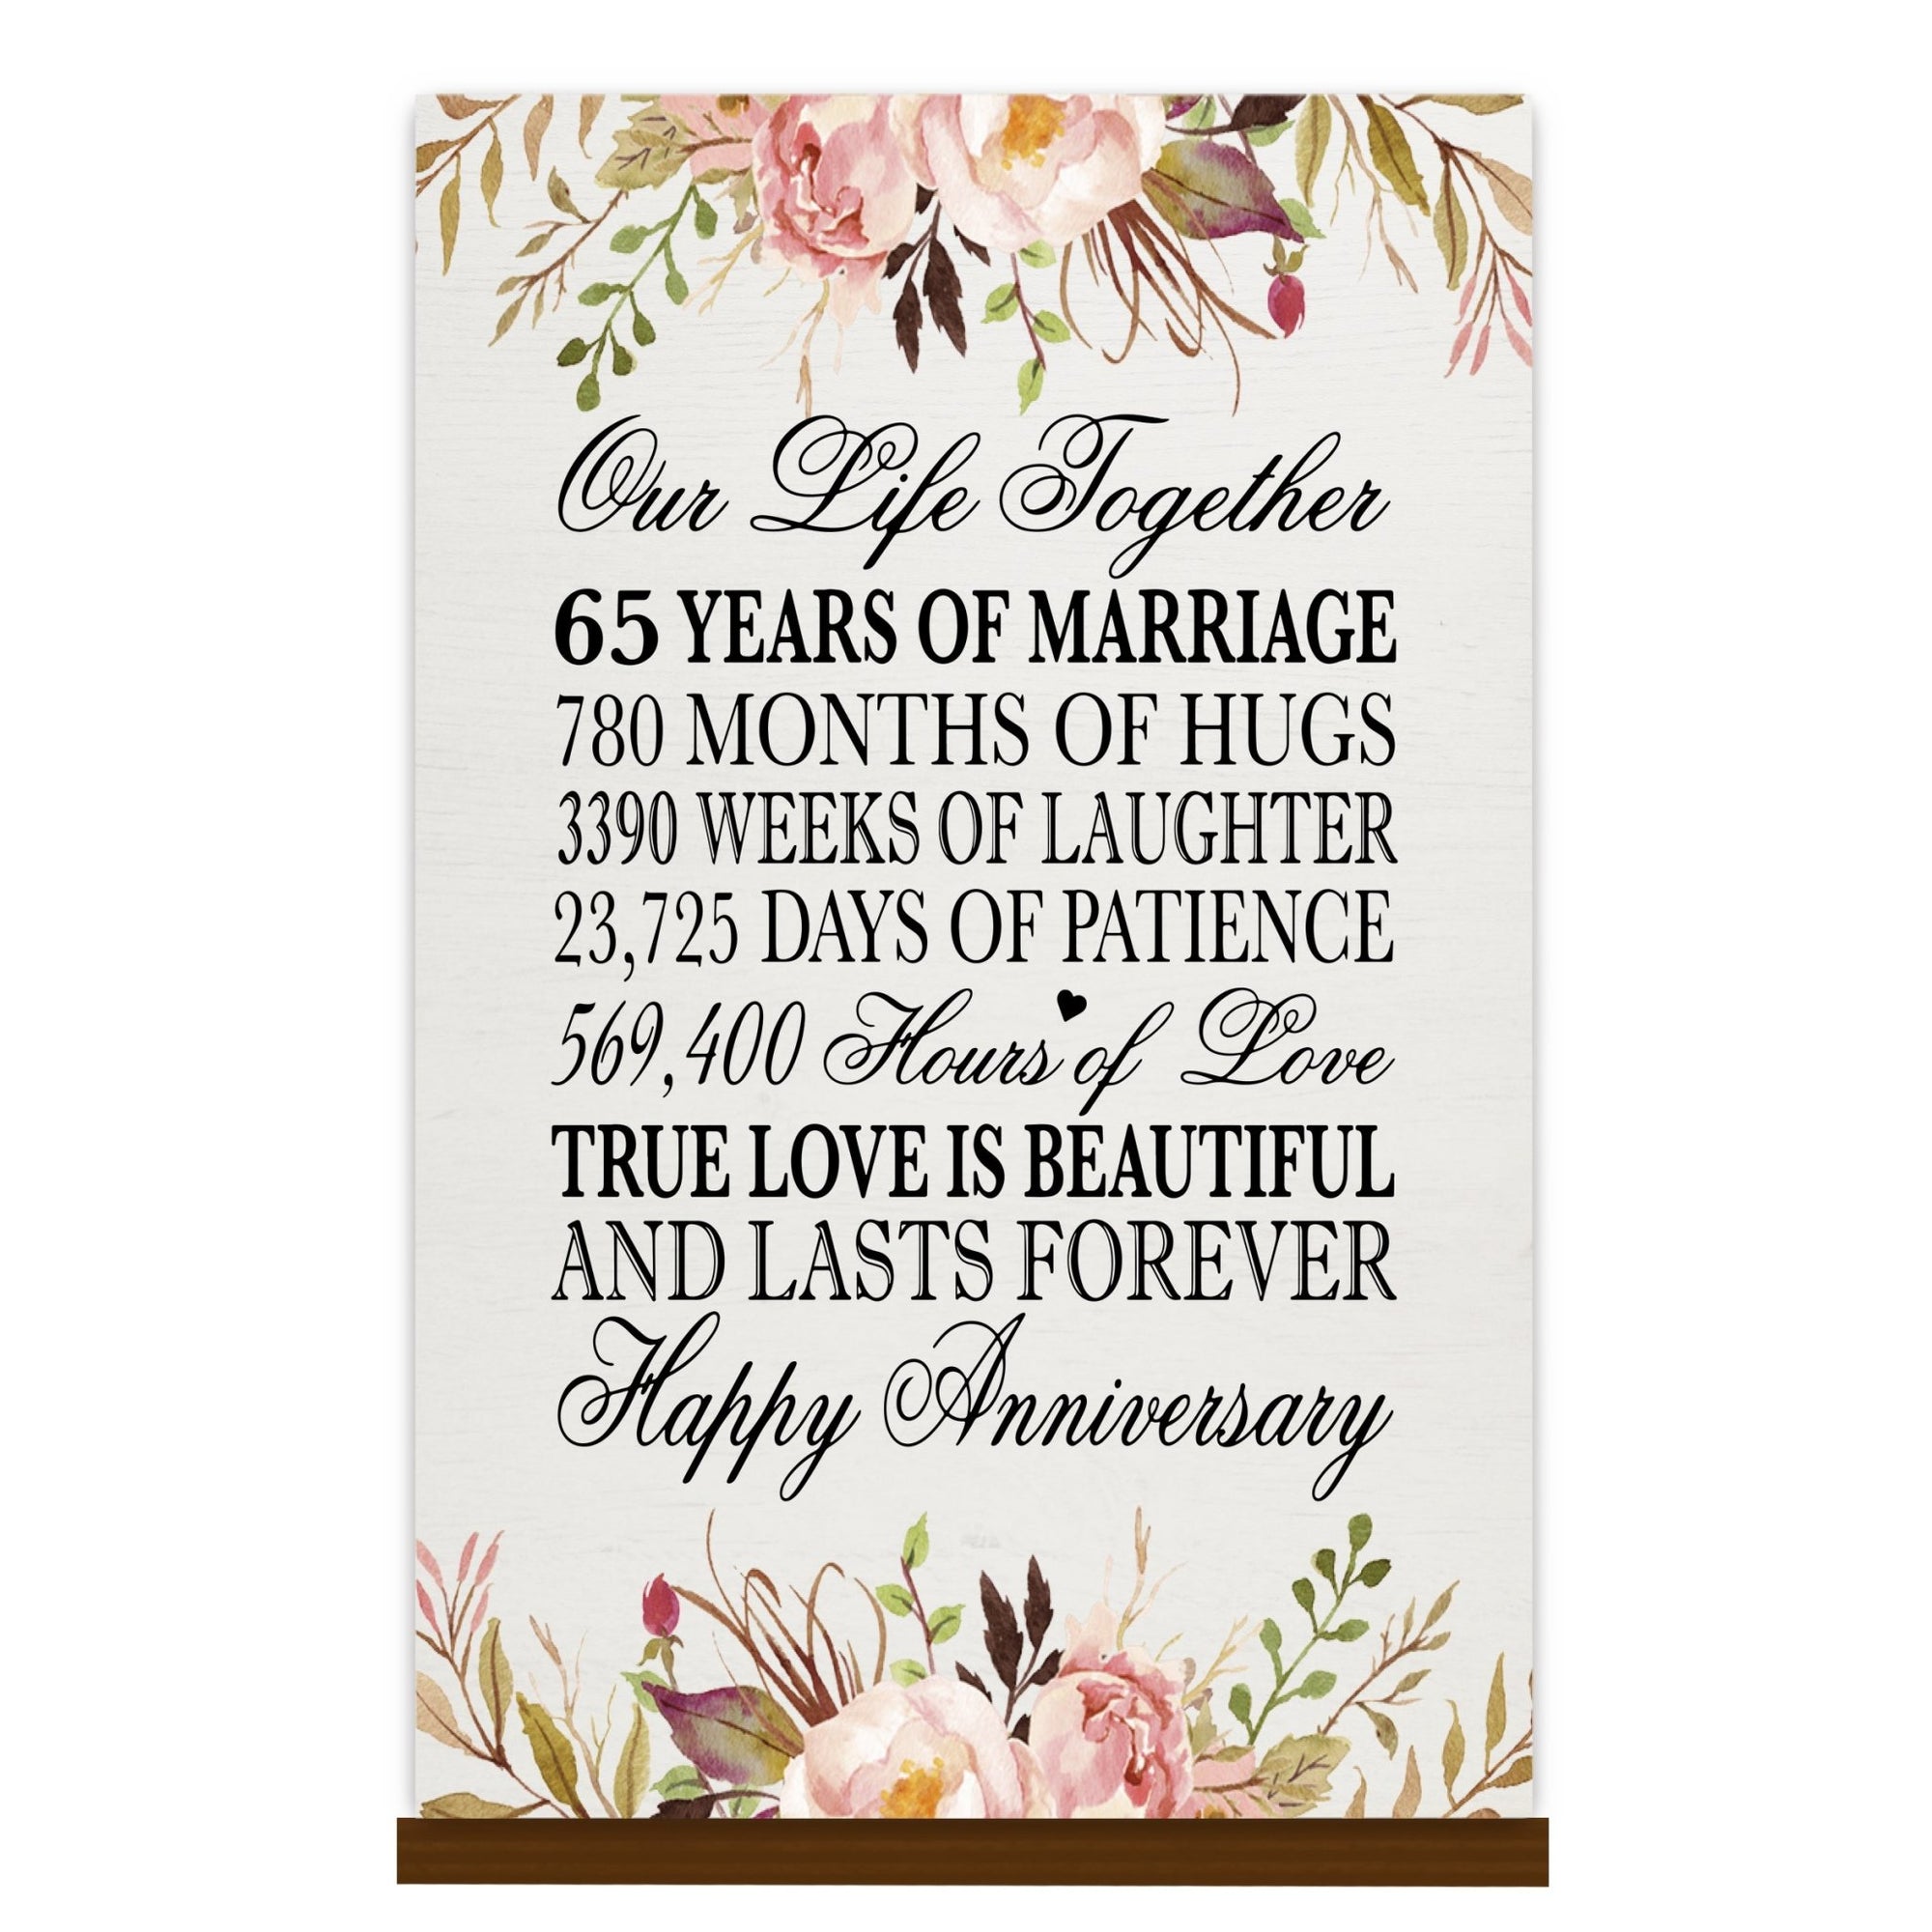 LifeSong Milestones 65th Anniversary Wall Plaque for Couples